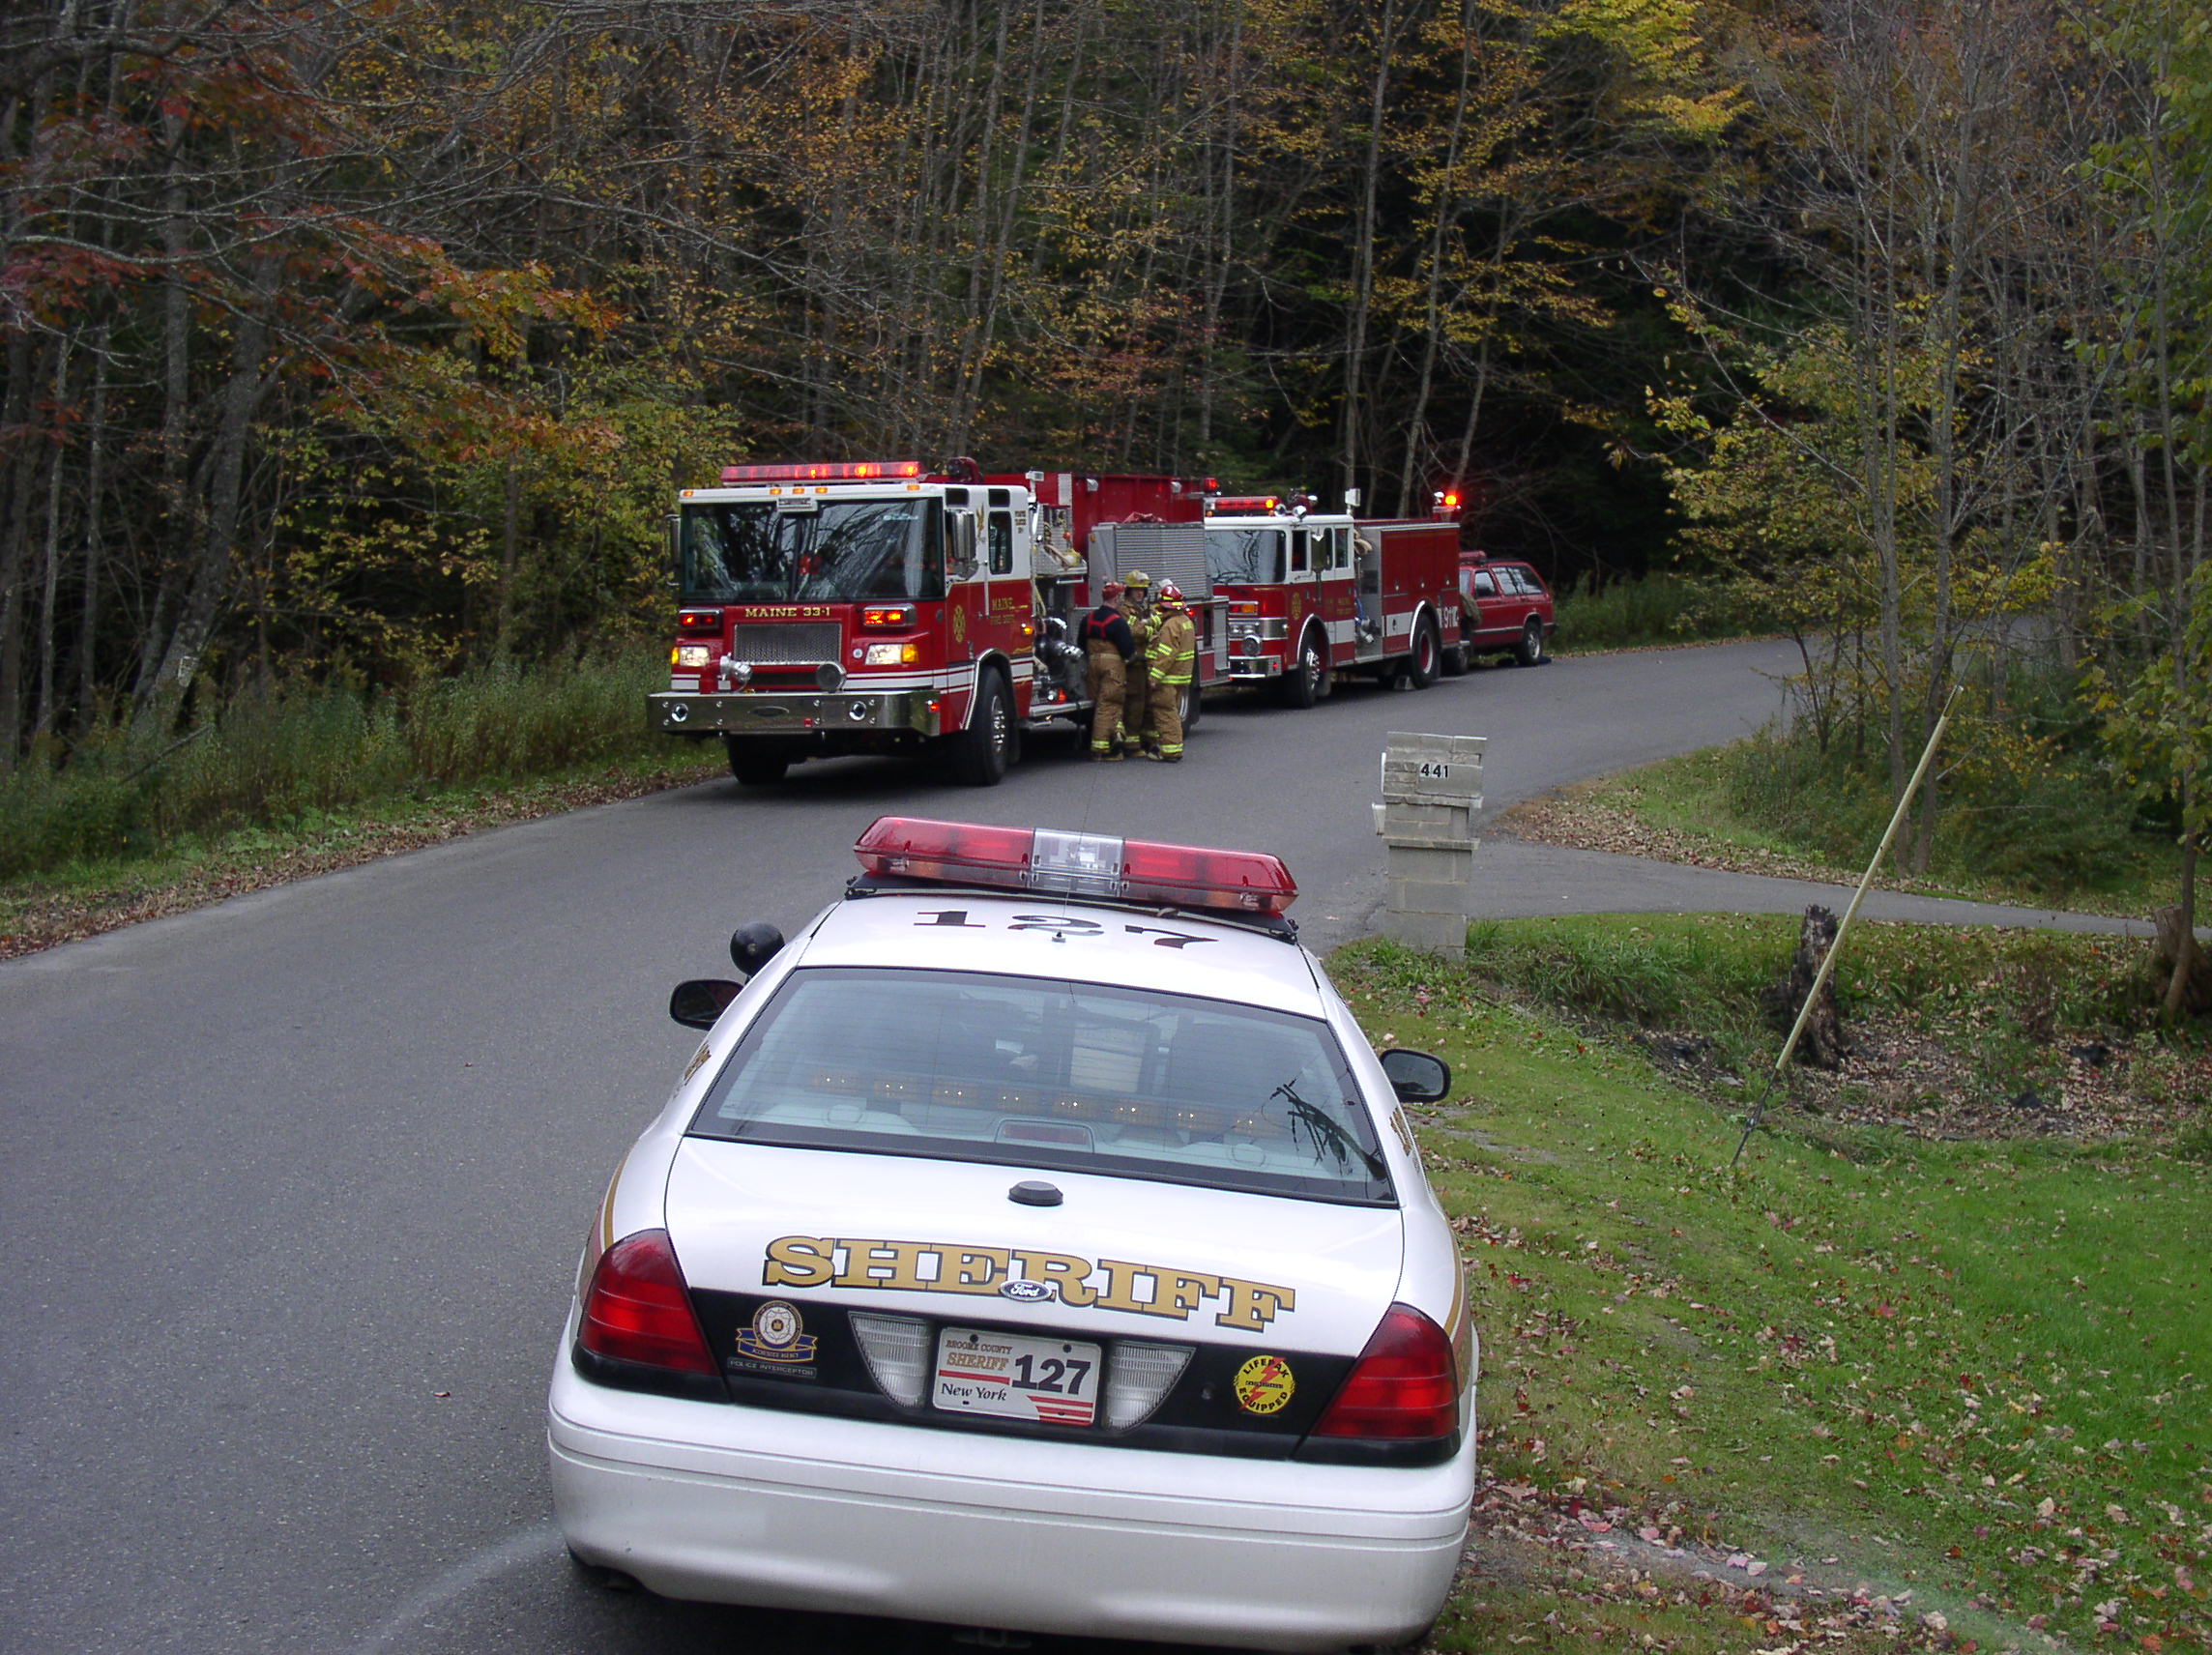 10-12-04  Response - Fire - Mutual Aid UC - Fredreick Rd